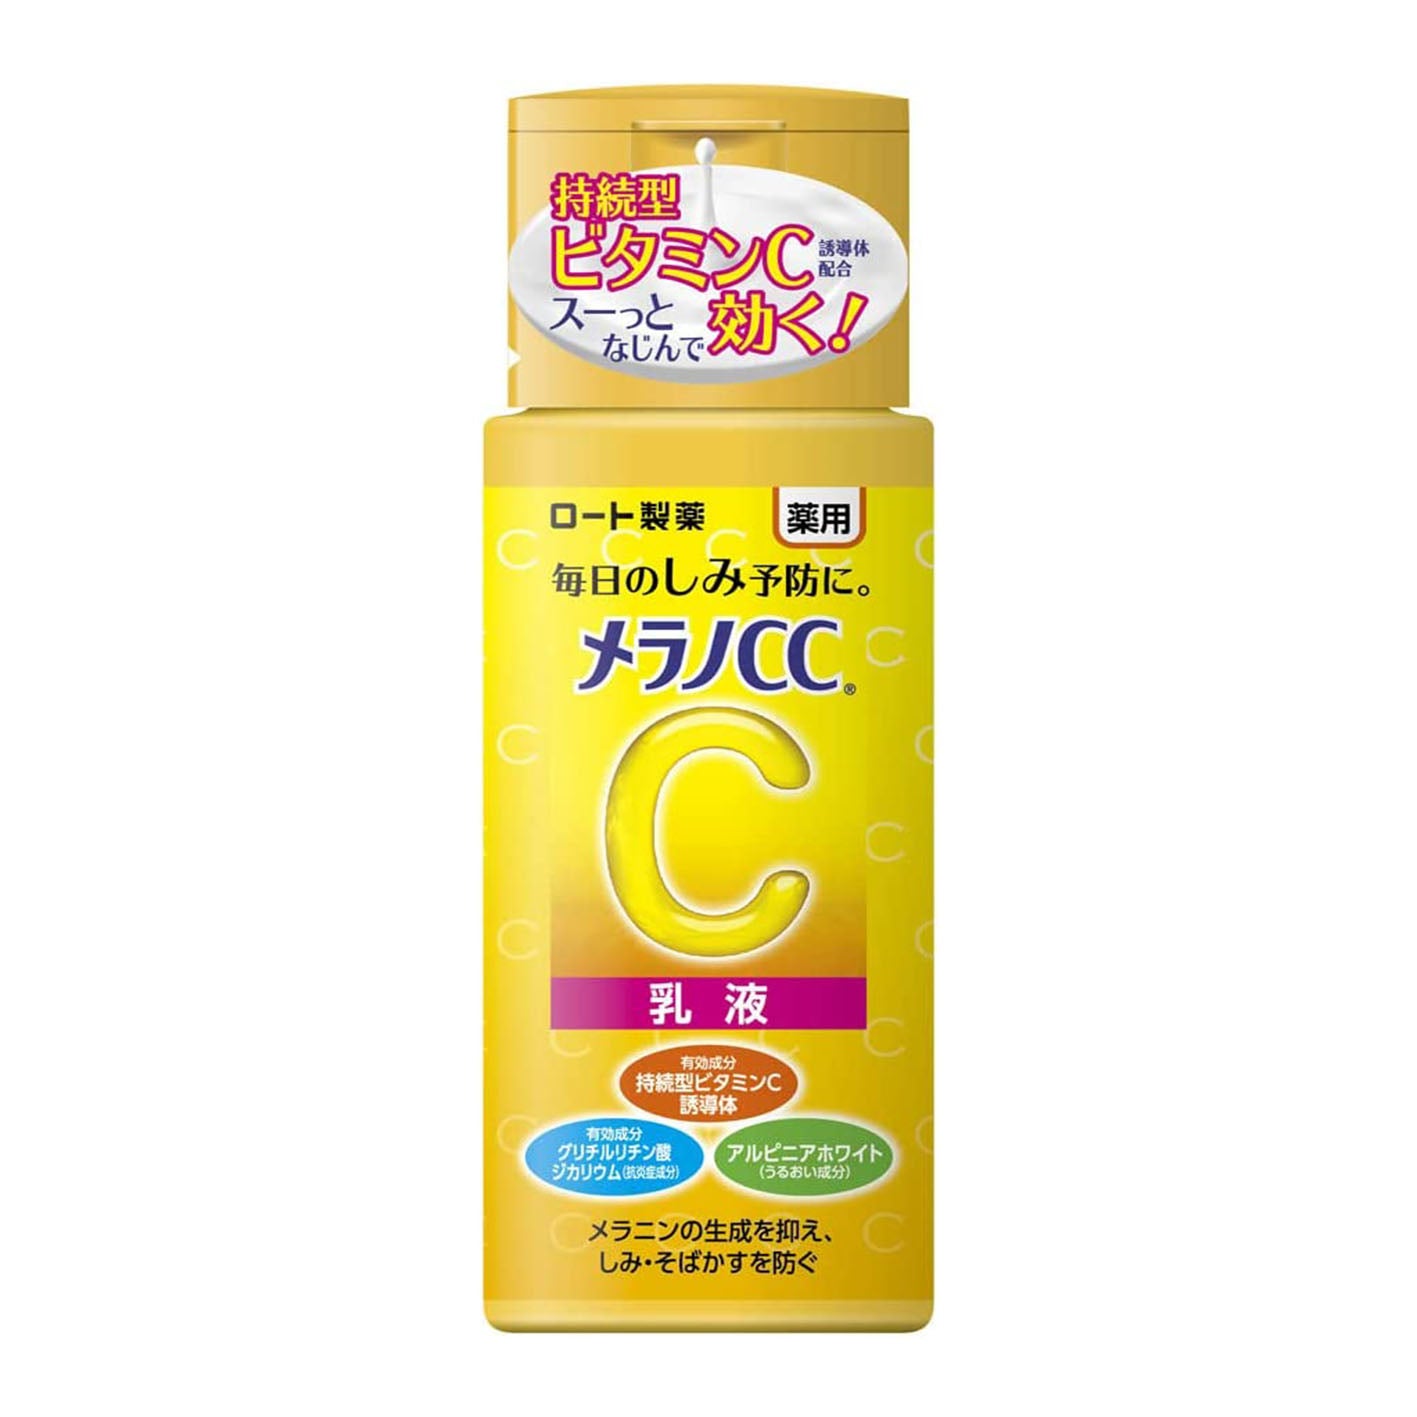 Melano CC Medicated Anti Spot Whitening Emulsion120ml - Harajuku Culture Japan - Japanease Products Store Beauty and Stationery